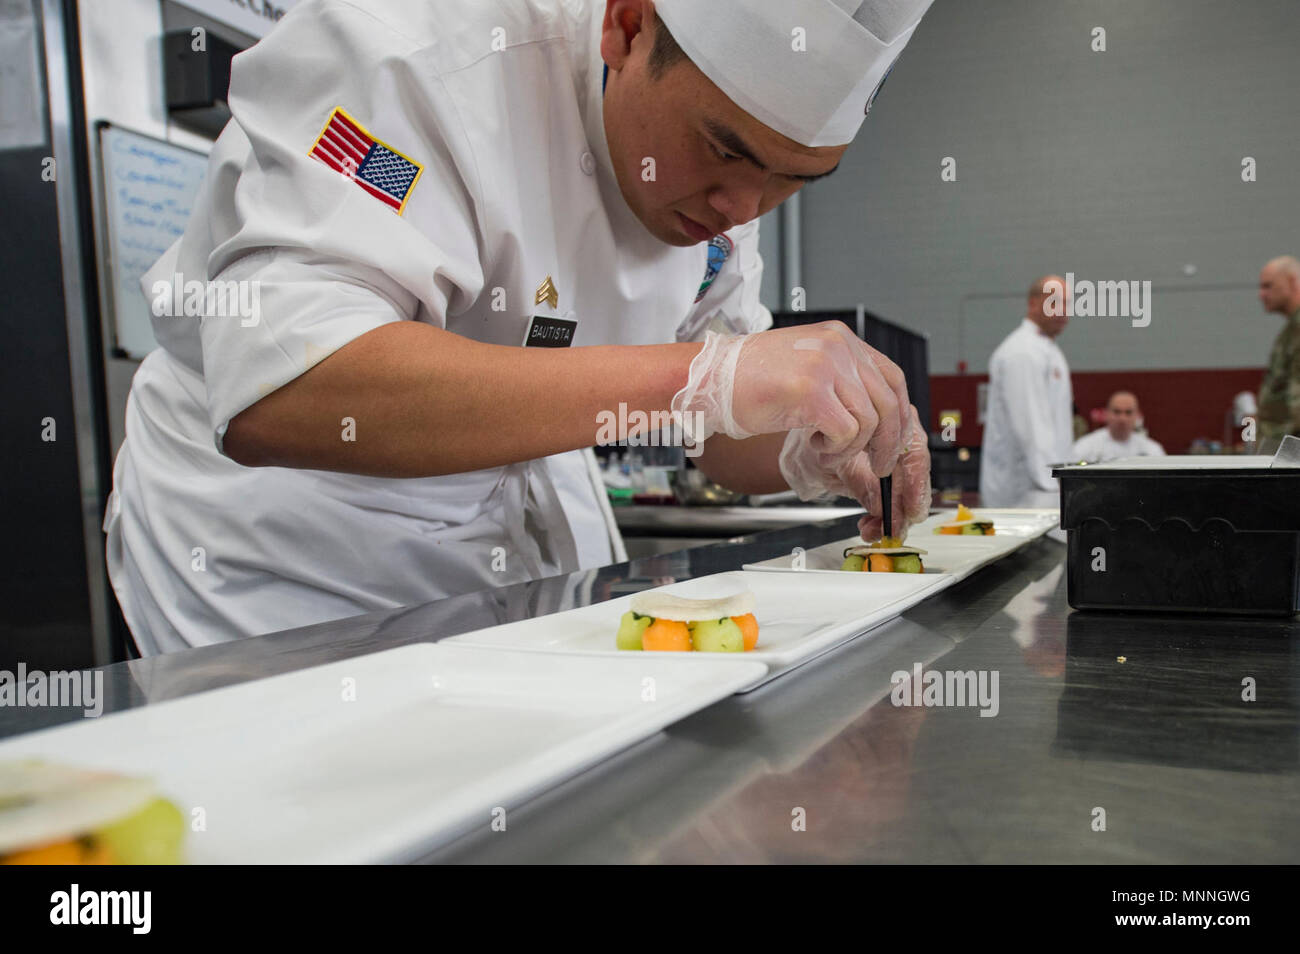 Fort Lee, Va. (March 14, 2018) Sgt. Klinton Bautista, representing Joint Base Lewis McChord, Washington, plates a meal during the nutrition competition as part of the Joint Culinary Training Exercise (JCTE). The annual Fort Lee JCTE is the largest American Culinary Federation-sanctioned competition in North America. Stock Photo